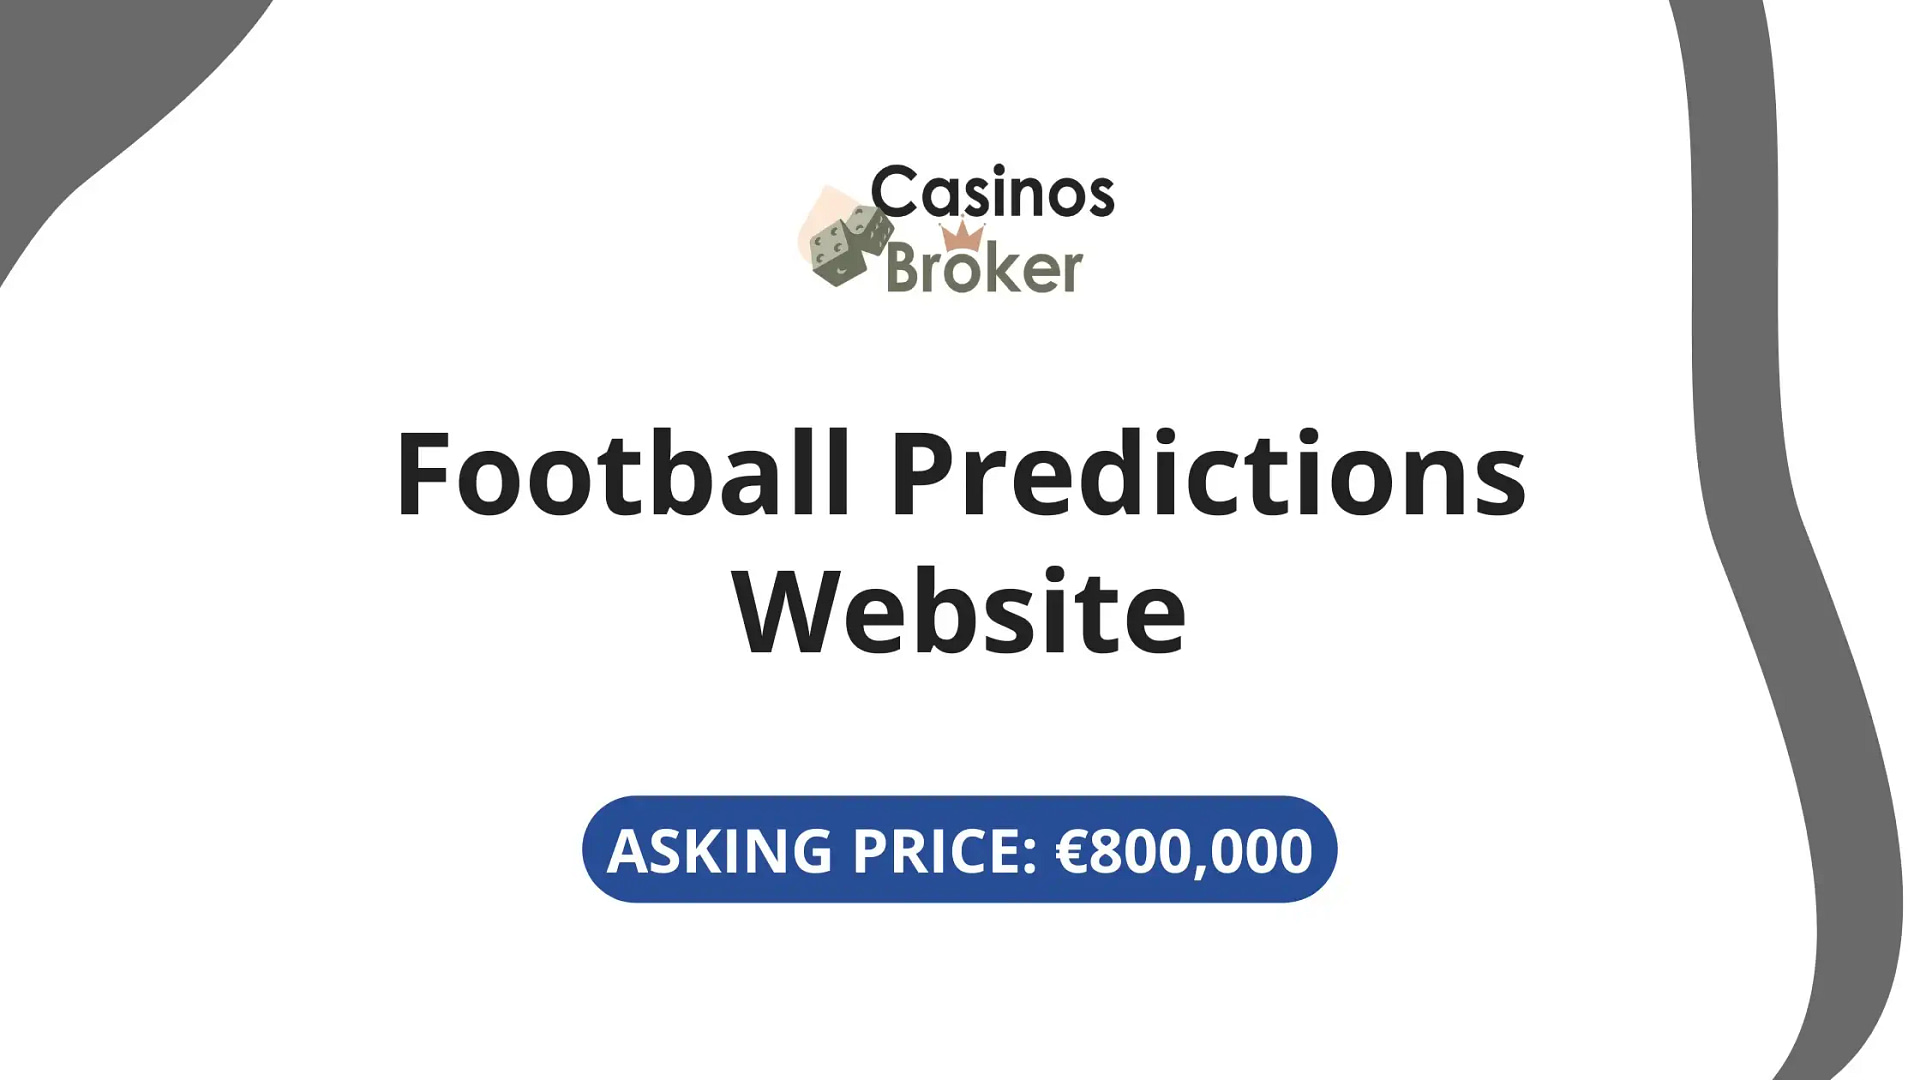 Football Predictions Website - Asking price €800,000